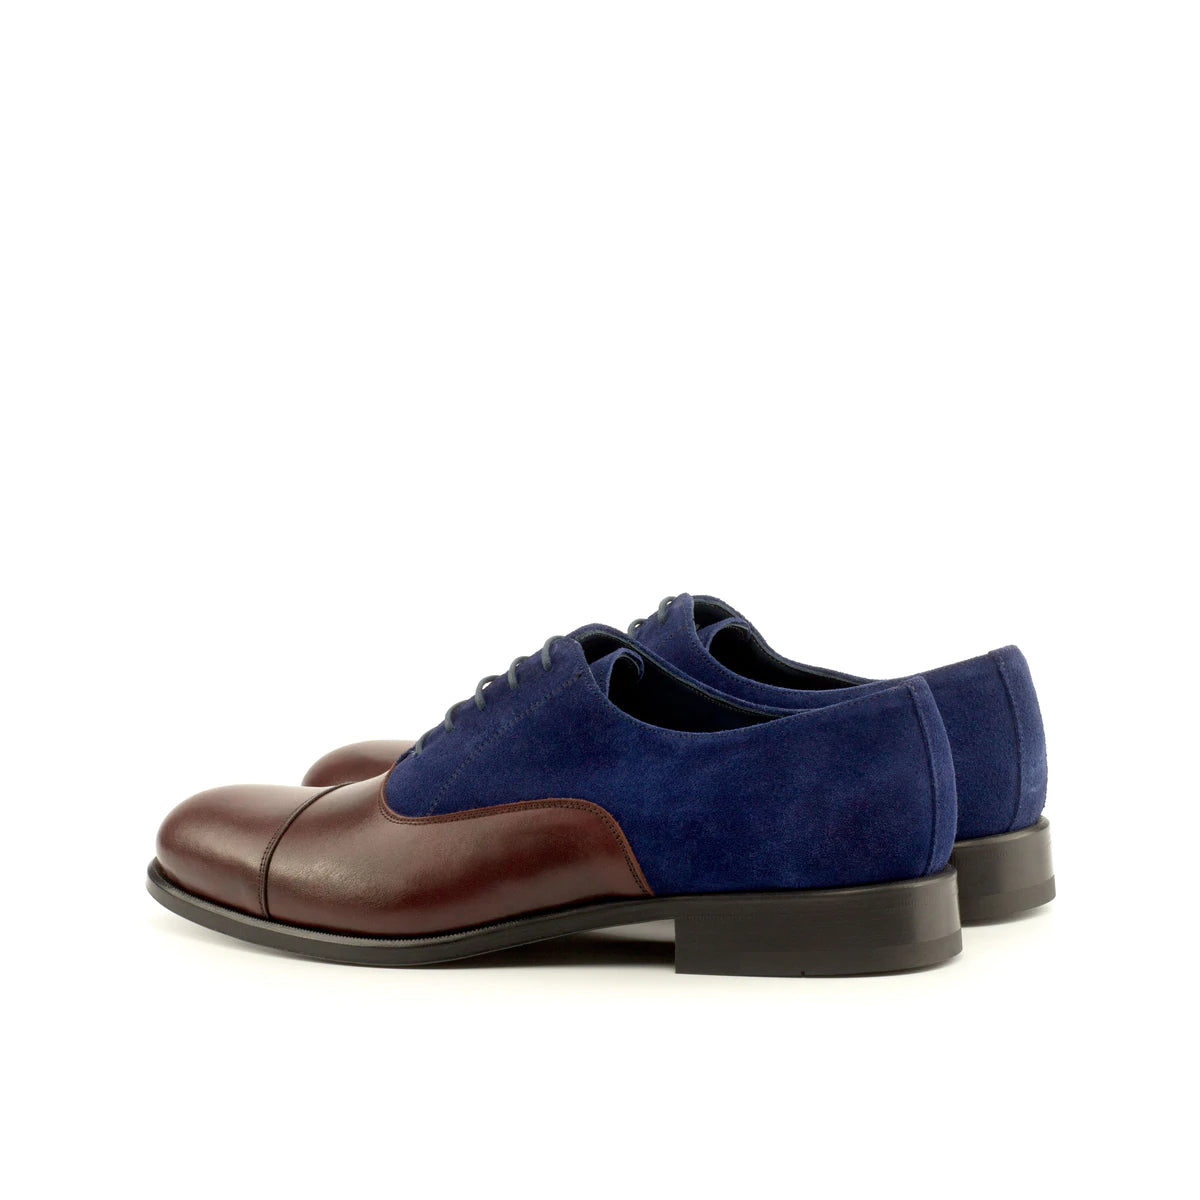 Toe Cap Oxford - Burgundy with Luxury Suede - KING'S